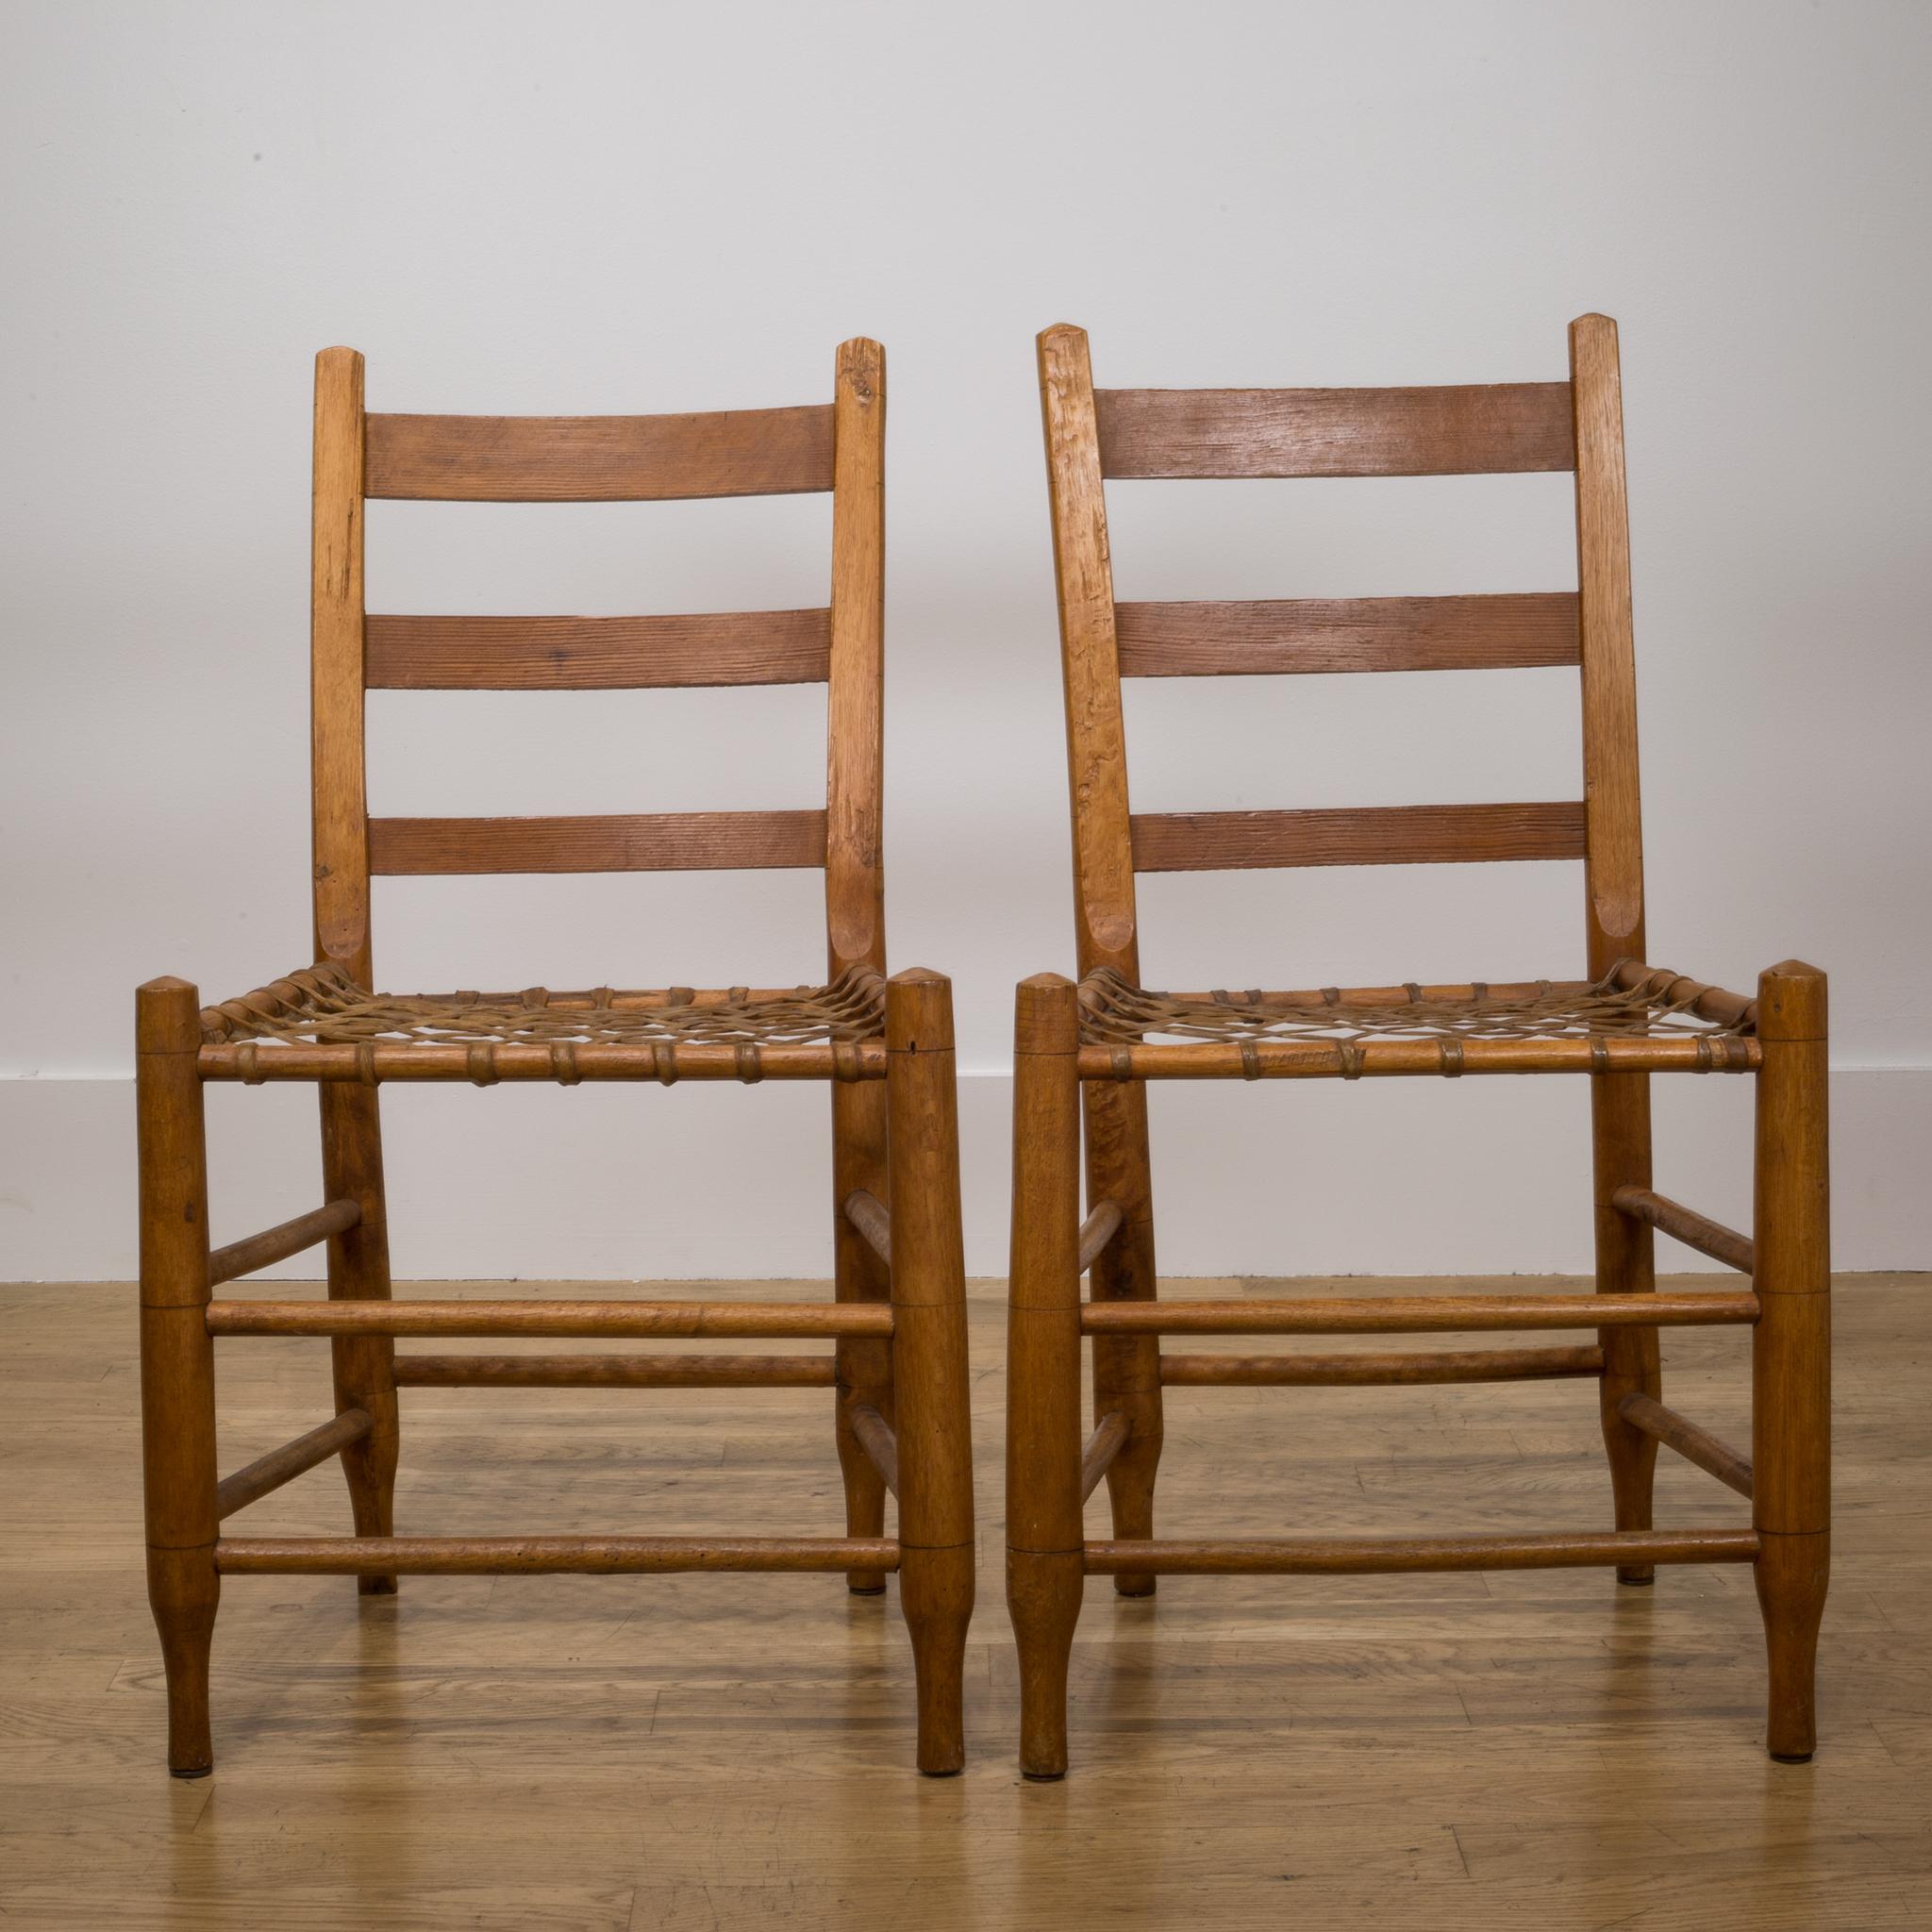 19th Century Rawhide Chairs from Historic Oregon Commune, circa 1856 3